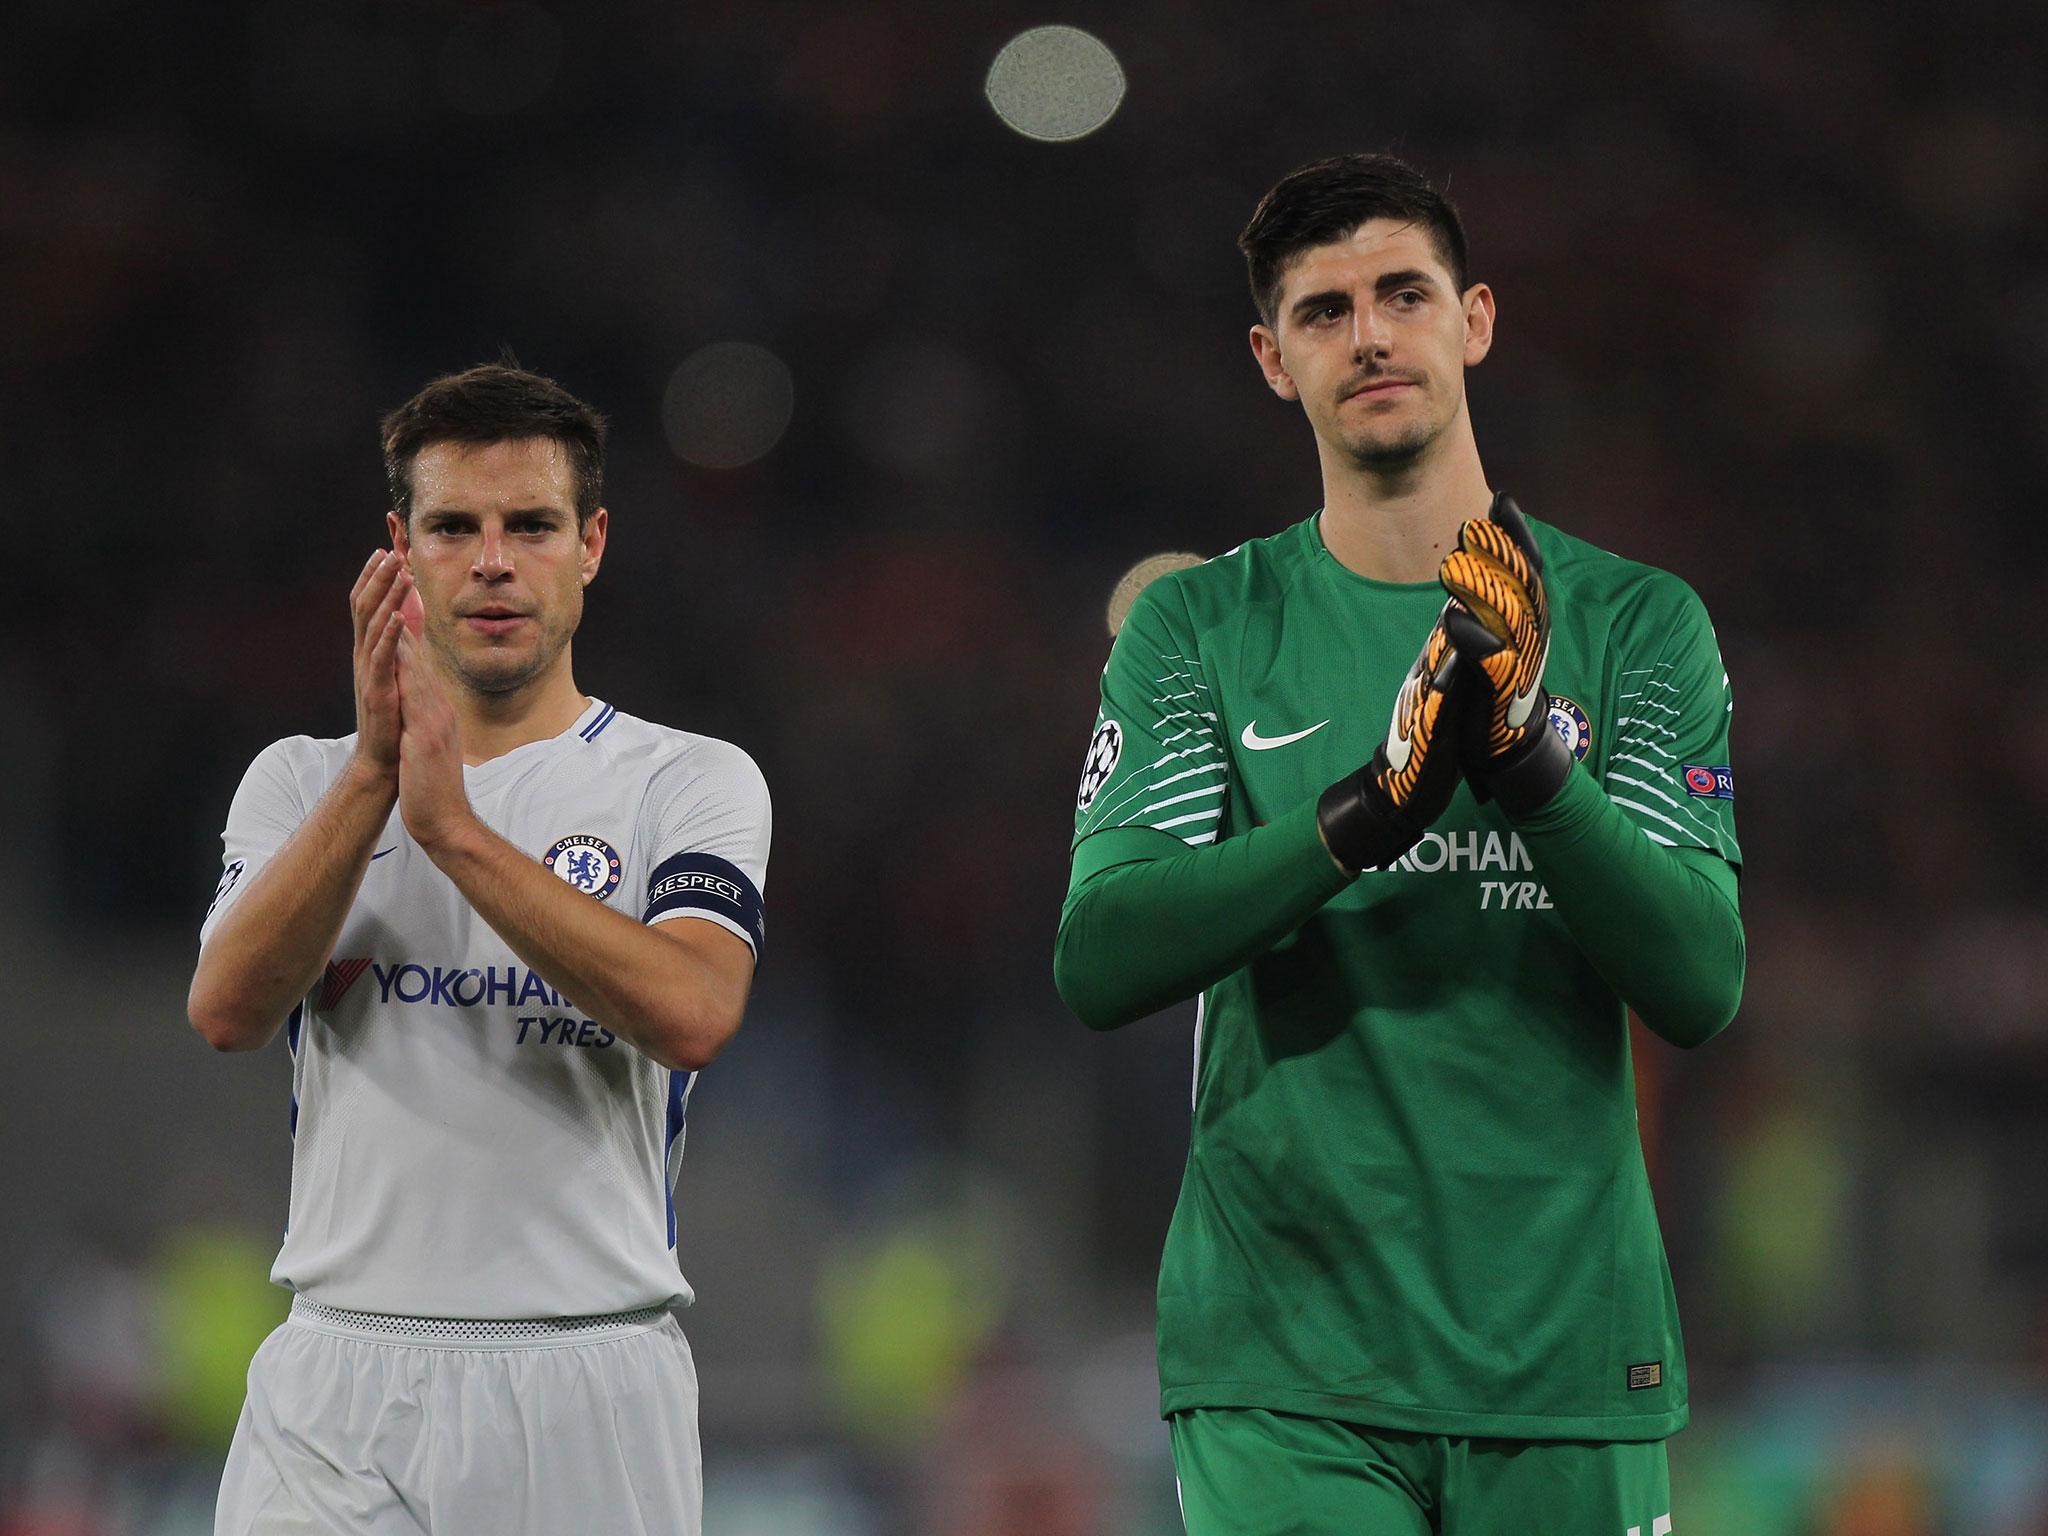 Thibaut Courtois knows the game with Manchester United could be decisive